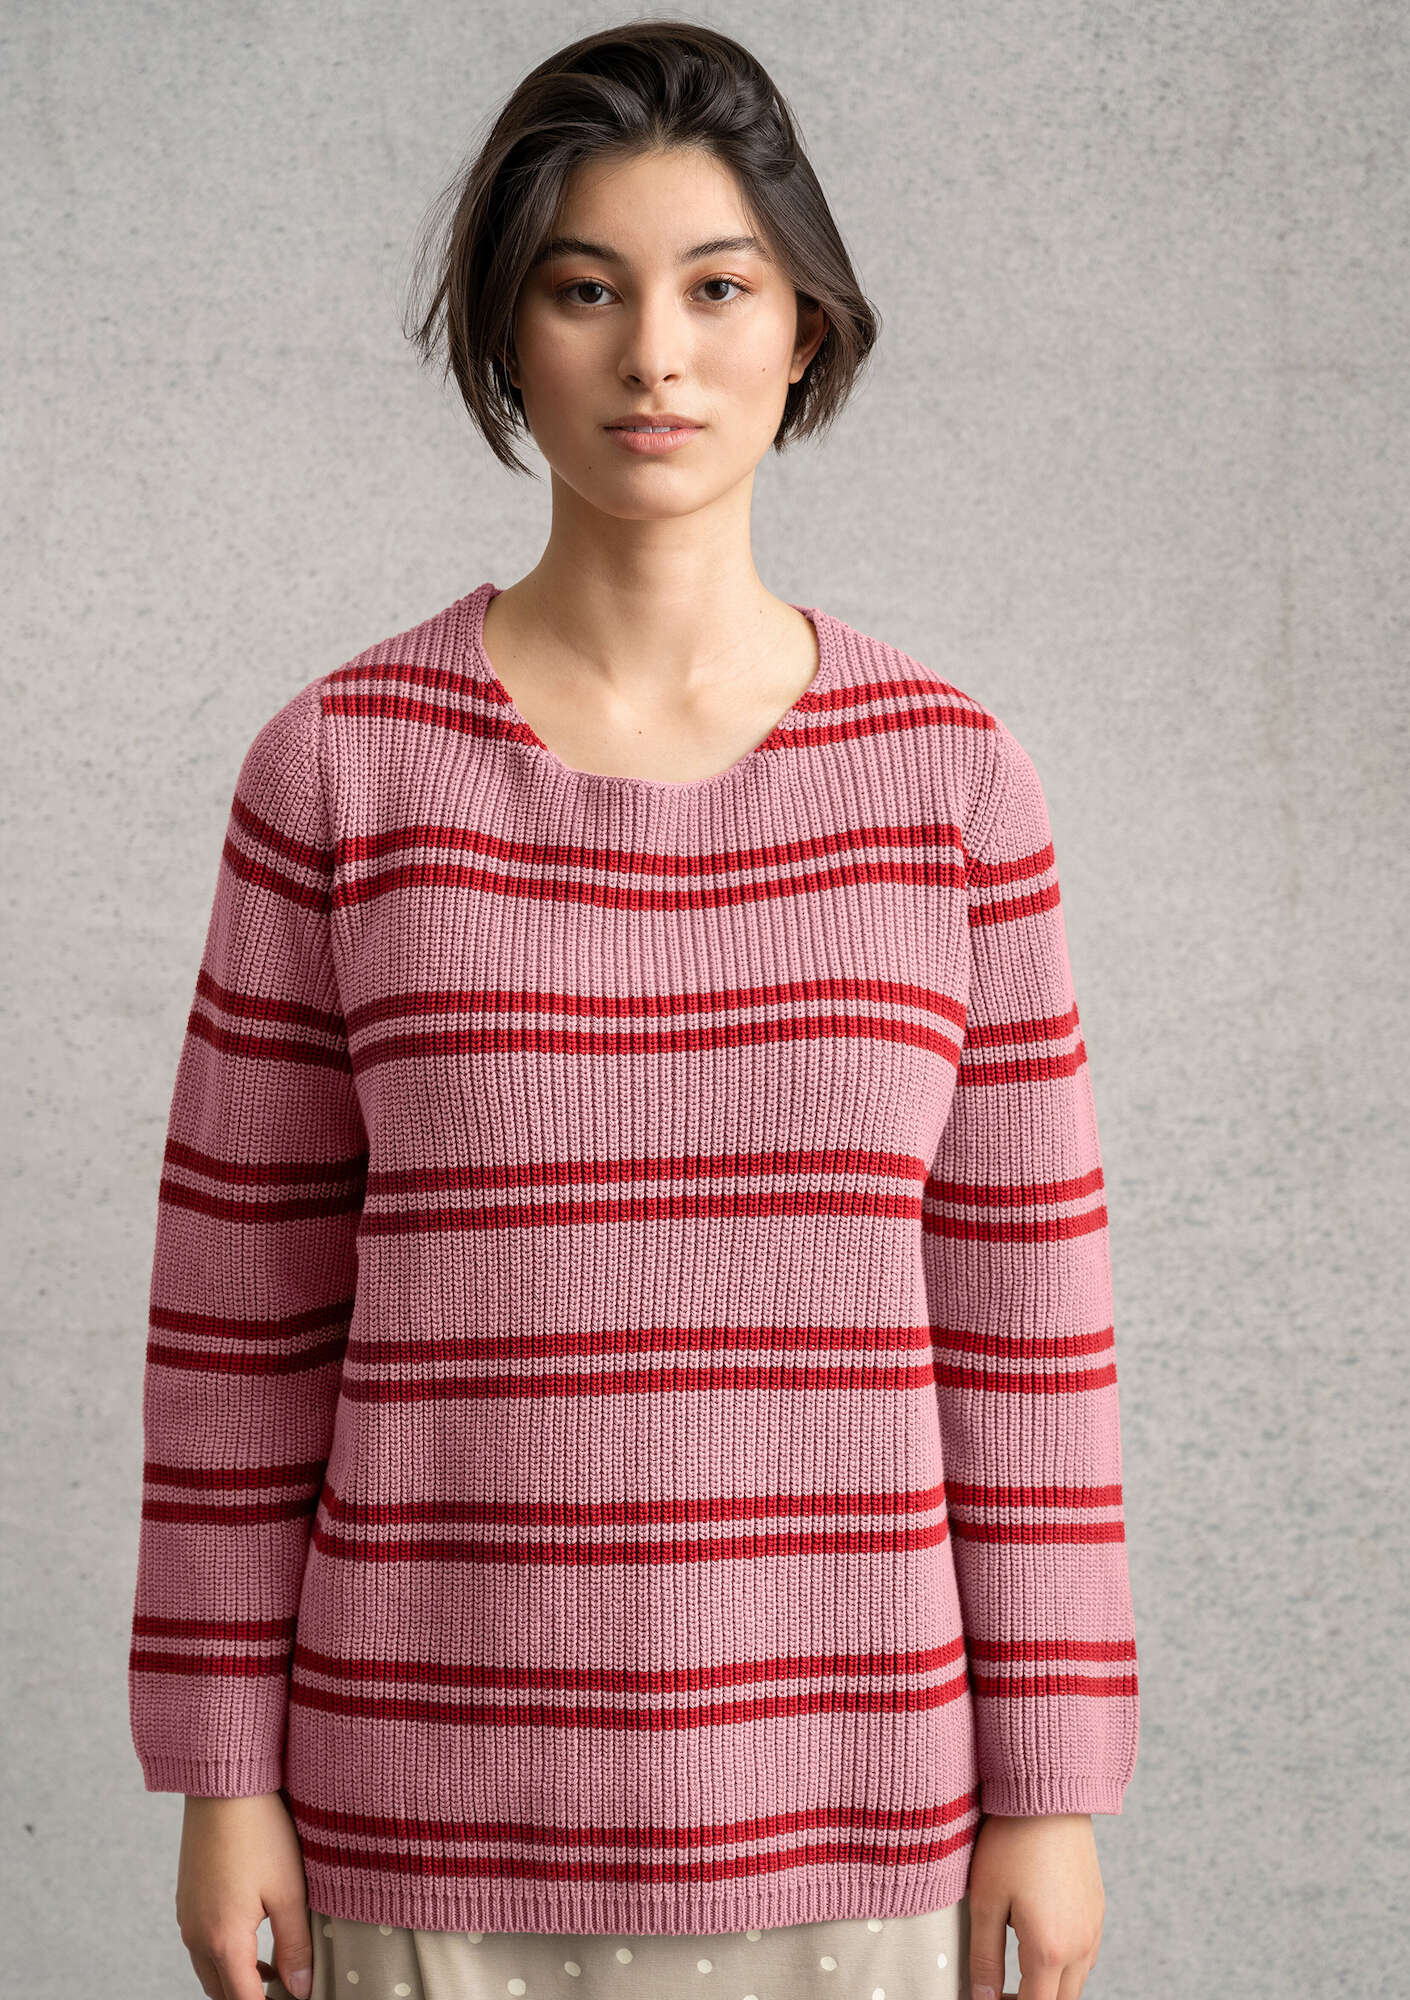 BÄSTIS sweater in recycled cotton dark lily/striped